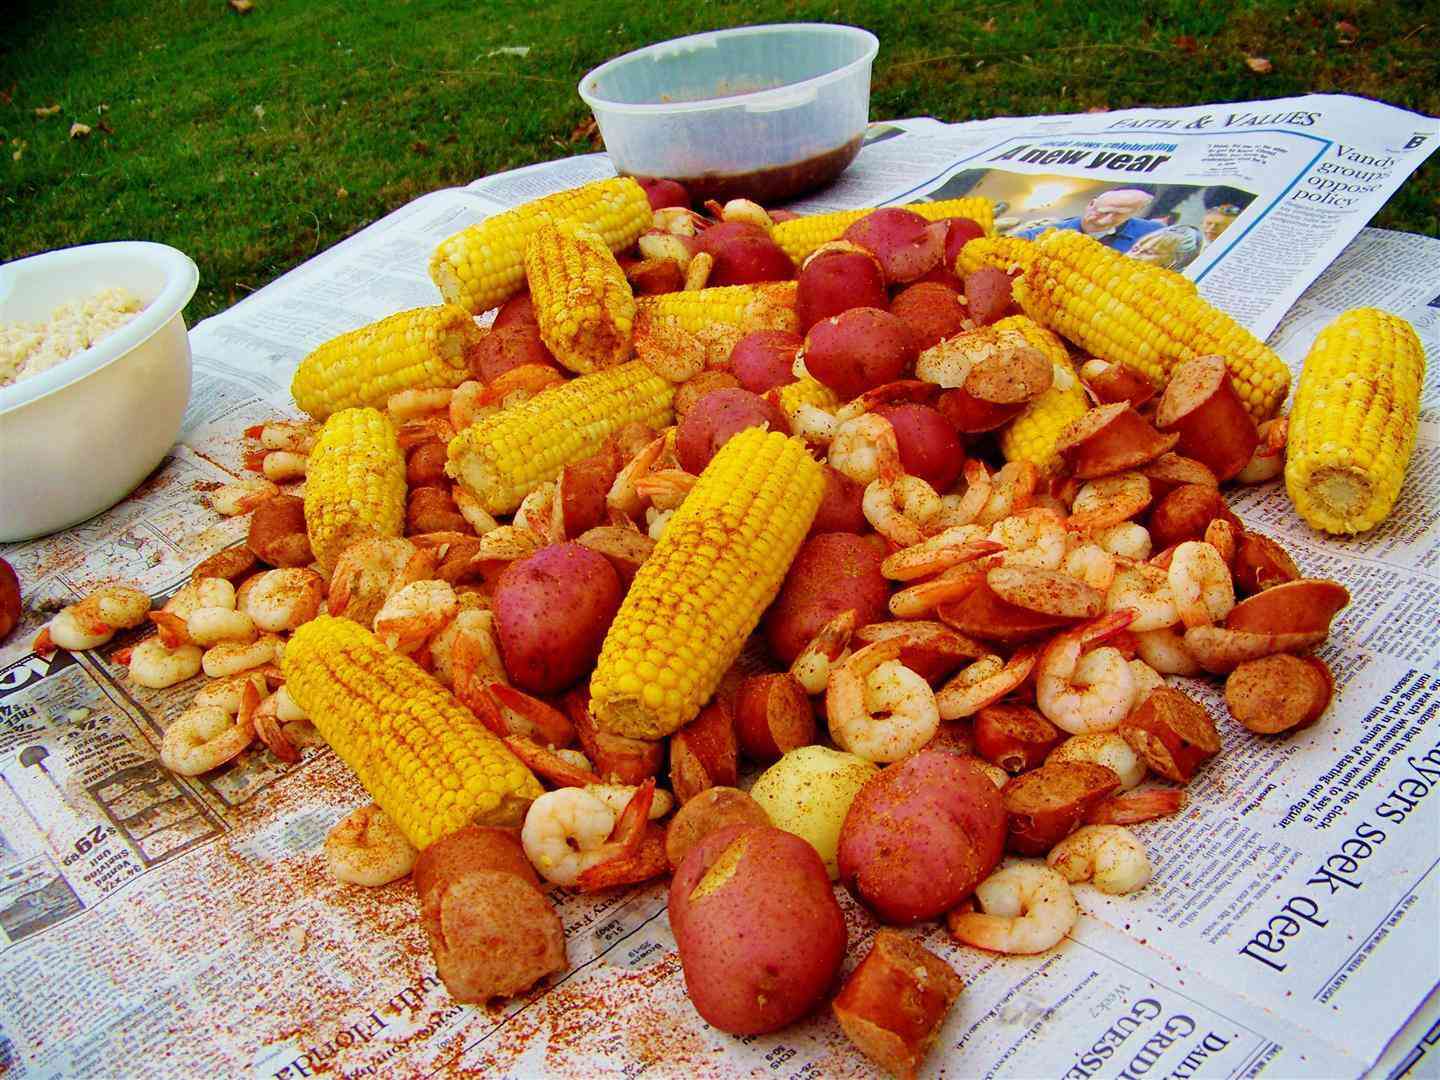 Daves Low Country Boil by Baasinator on newspaper 10.24.11